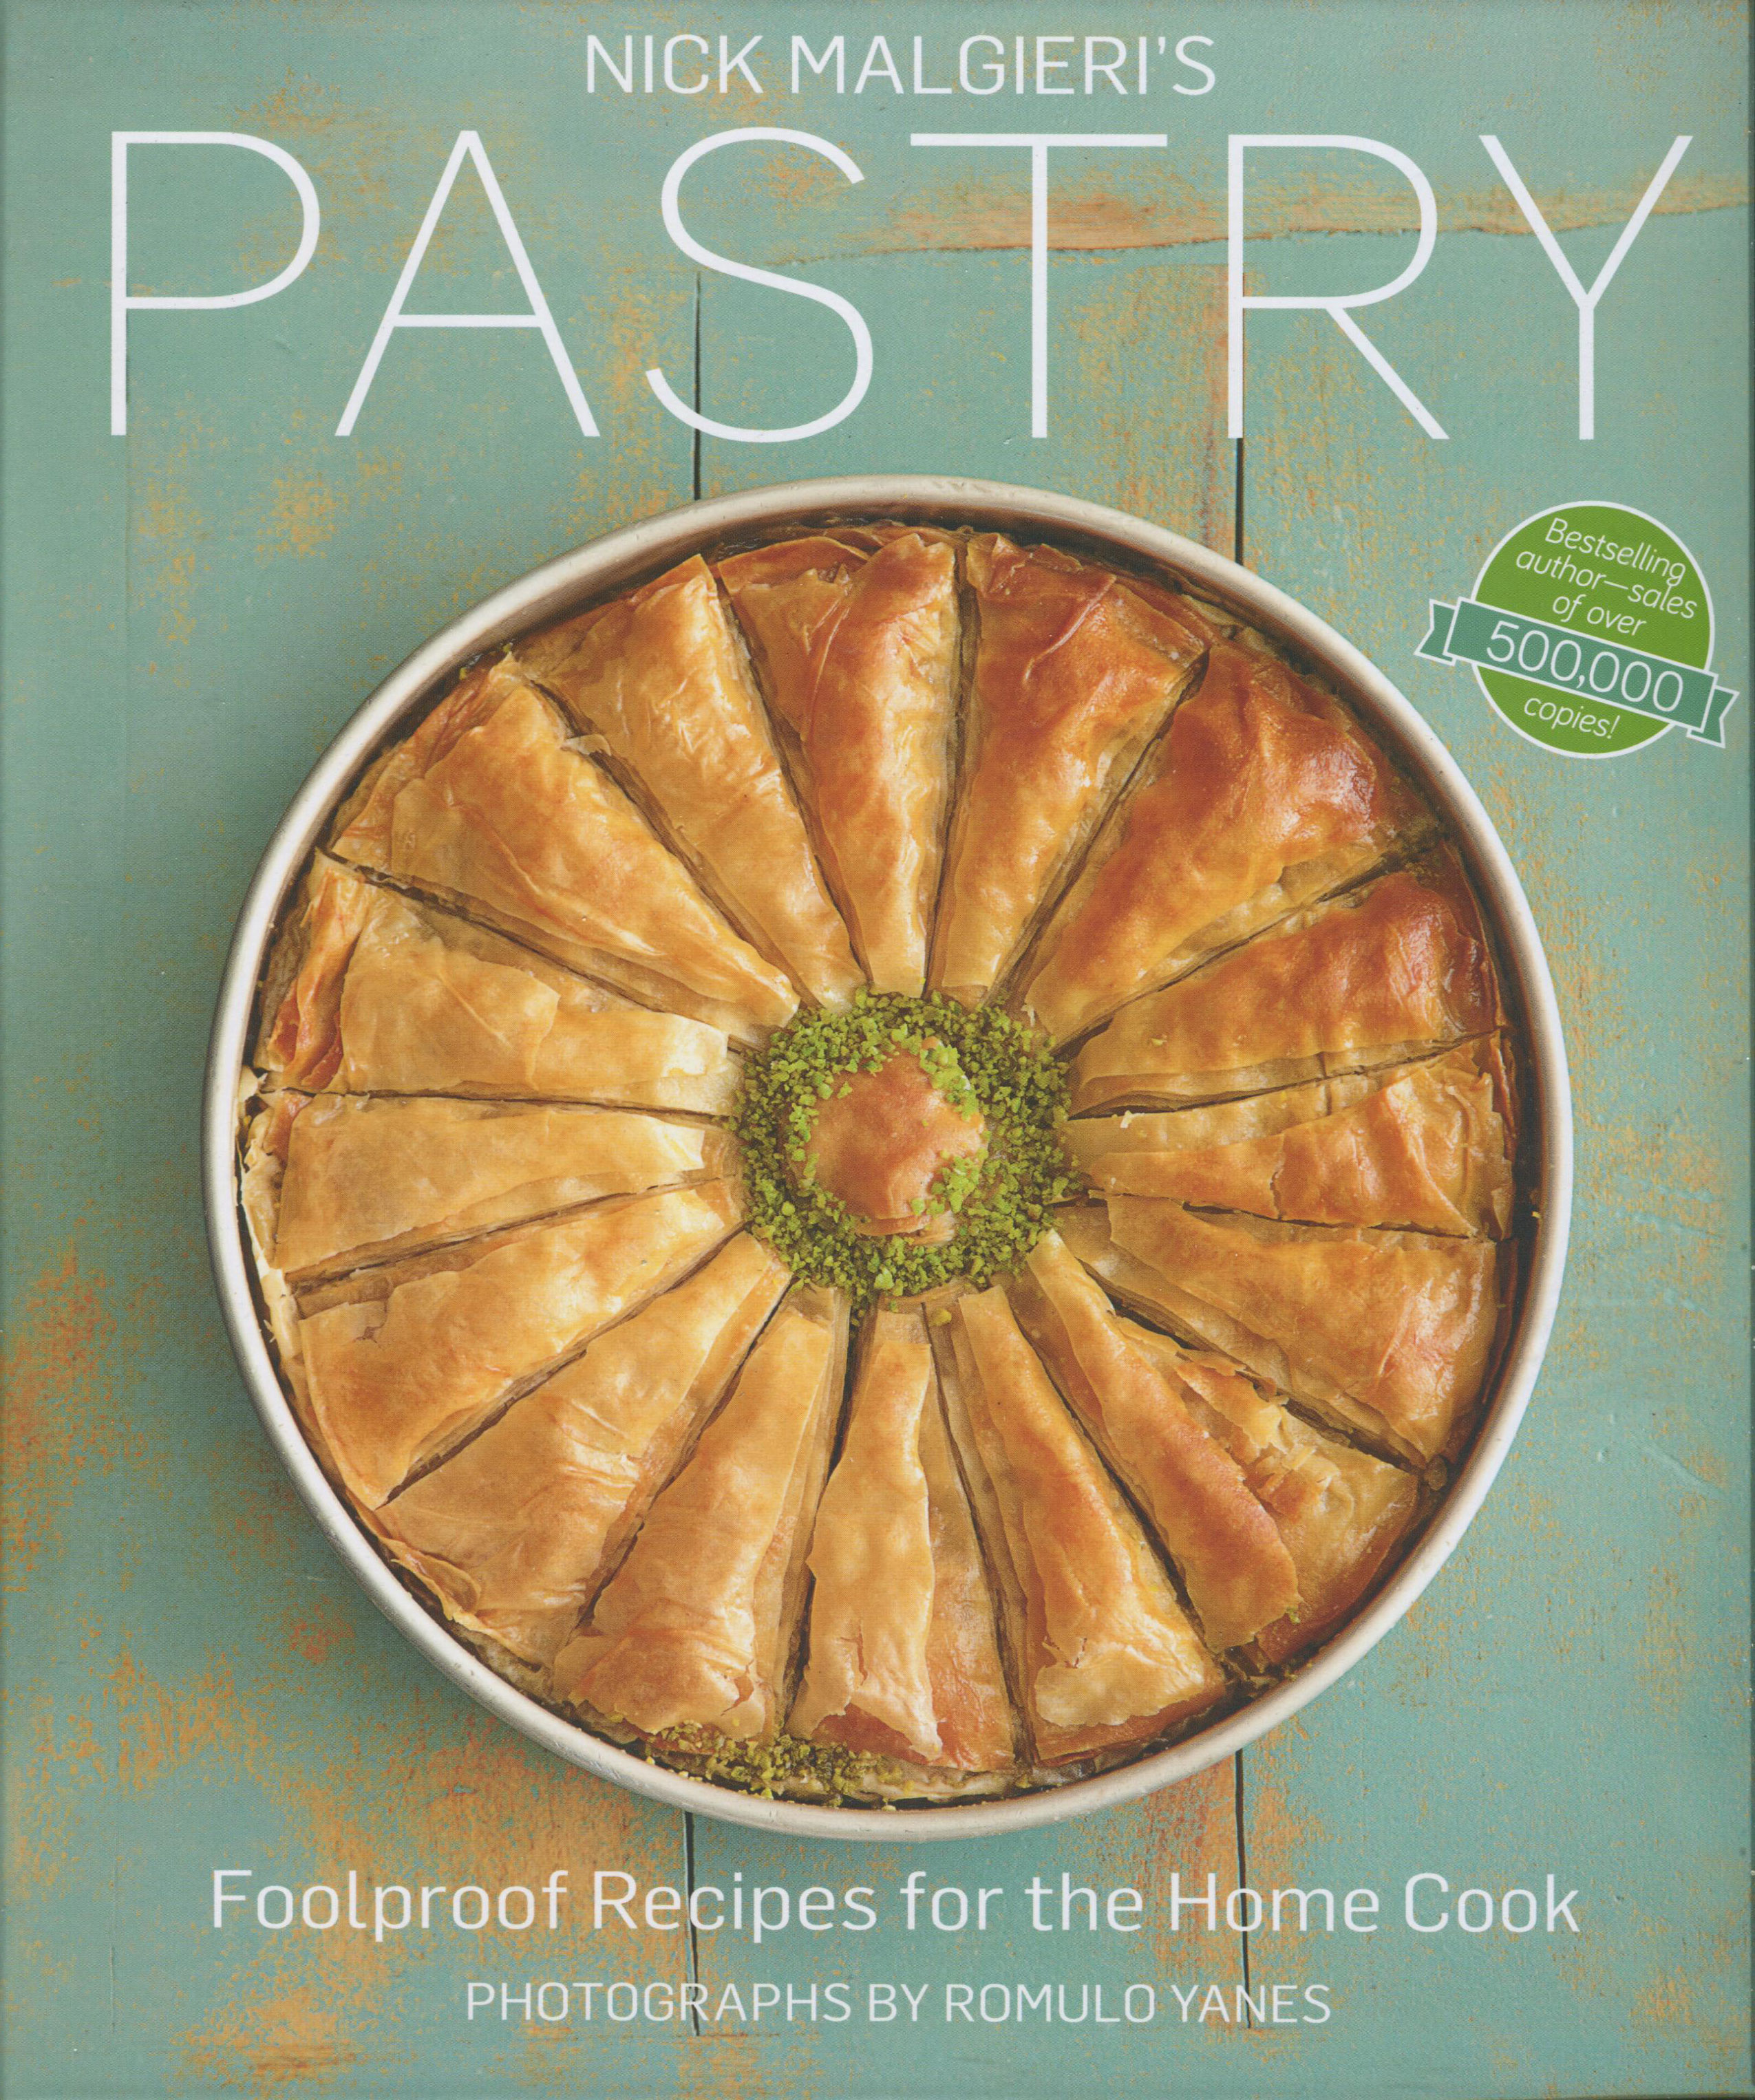 TBT Cookbook Review: Pastry by Nick Malgieri